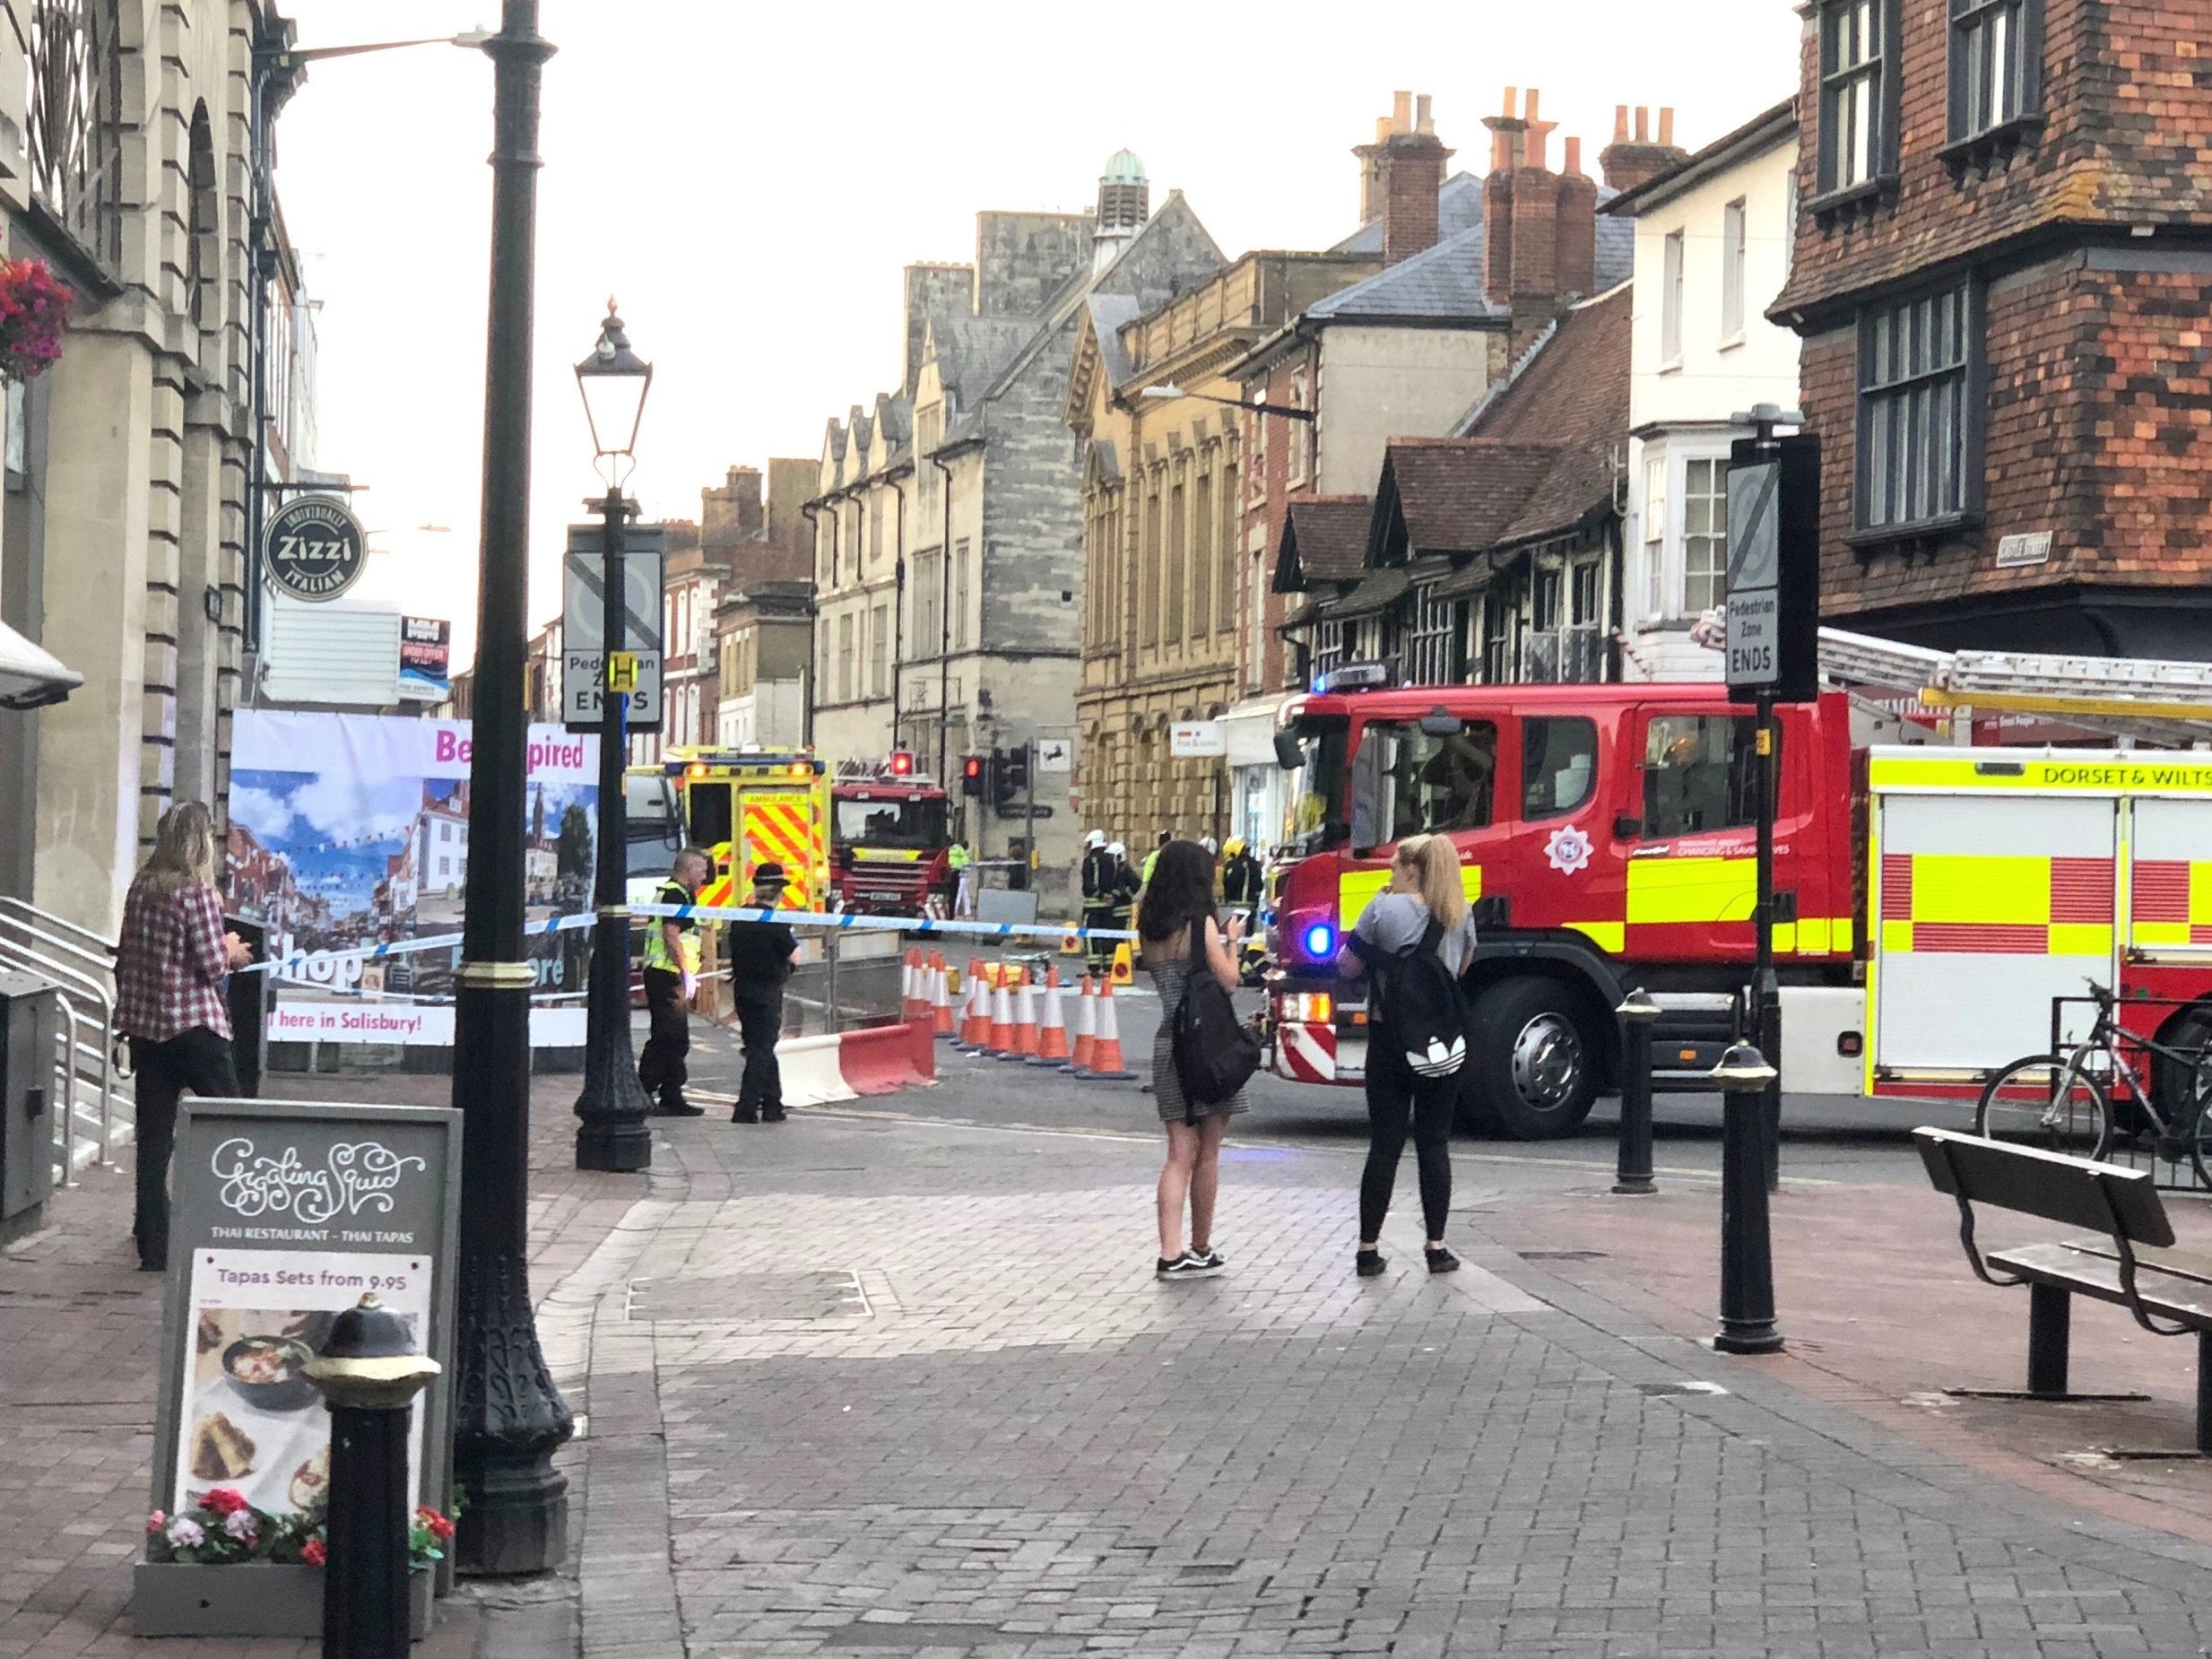 Police in Salisbury cordoned off a section of road near the Zizzi restaurant after a man was found in the street